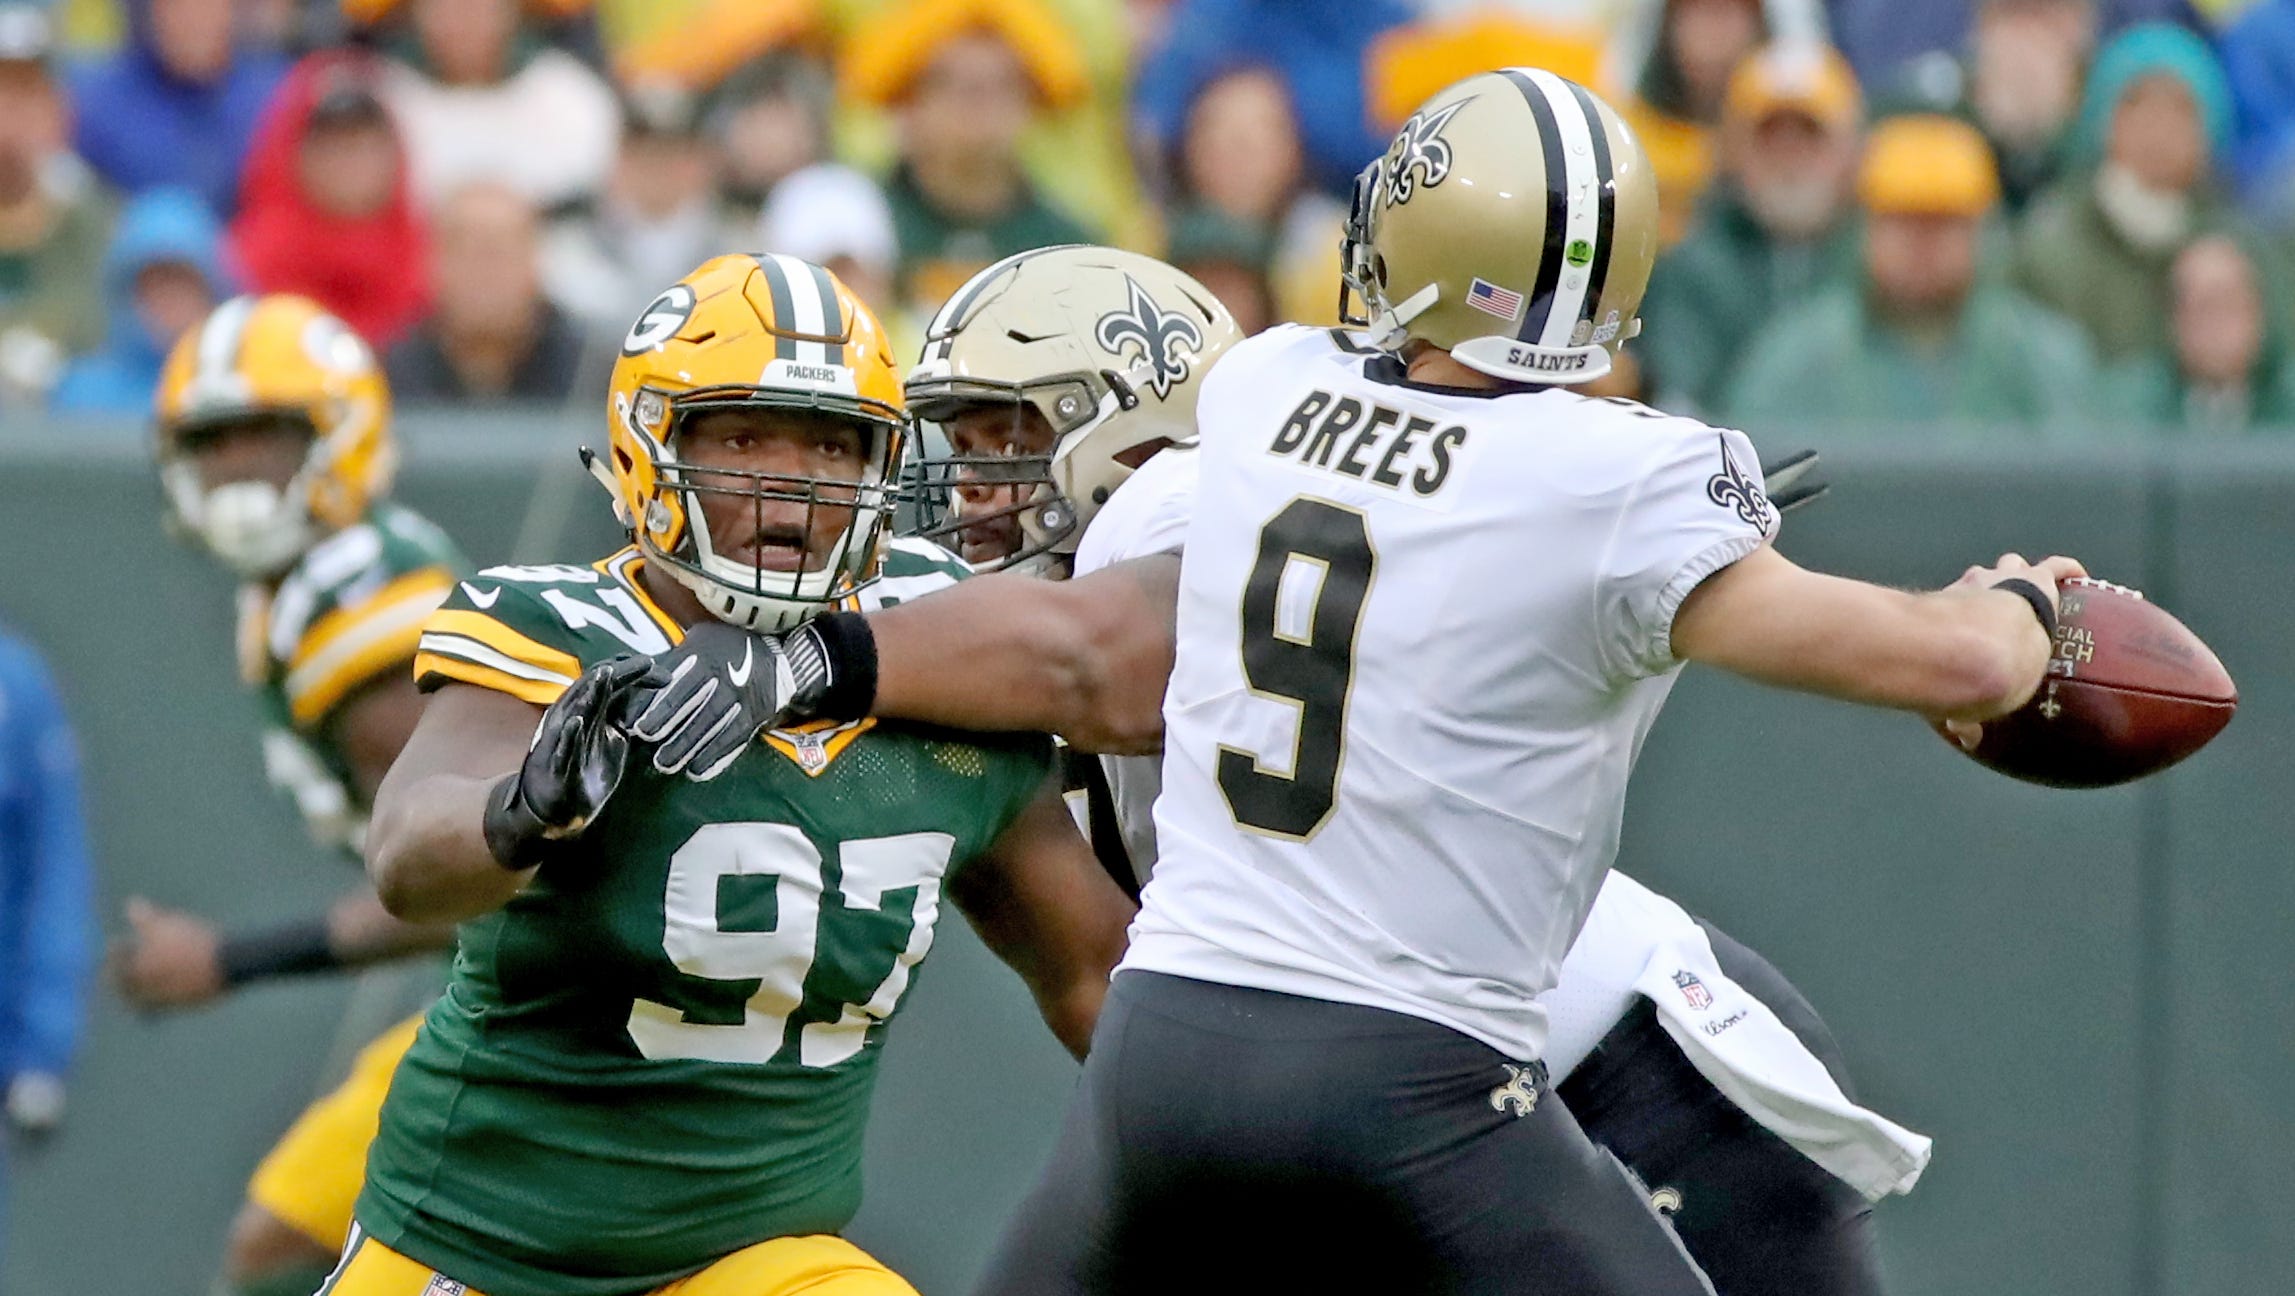 Green Bay Packers nose tackle Kenny Clark (97) rushes in on quarterback Drew Brees (9) against the New Orleans Saints Sunday, October 22, 2017 at Lambeau Field in Green Bay, Wis.